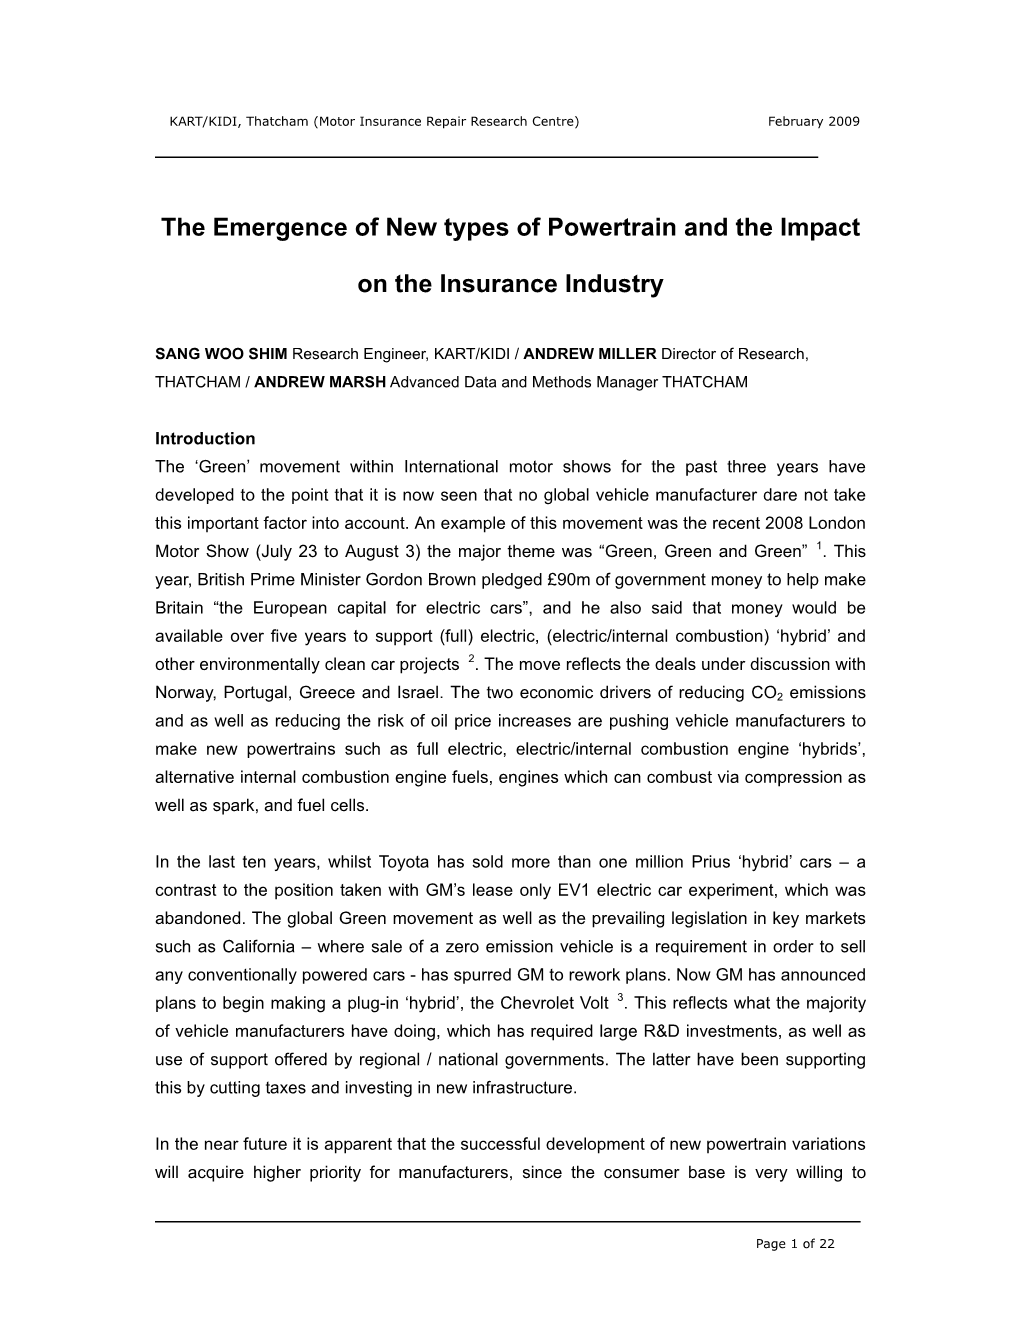 The Emergence of New Types of Powertrain and the Impact on The